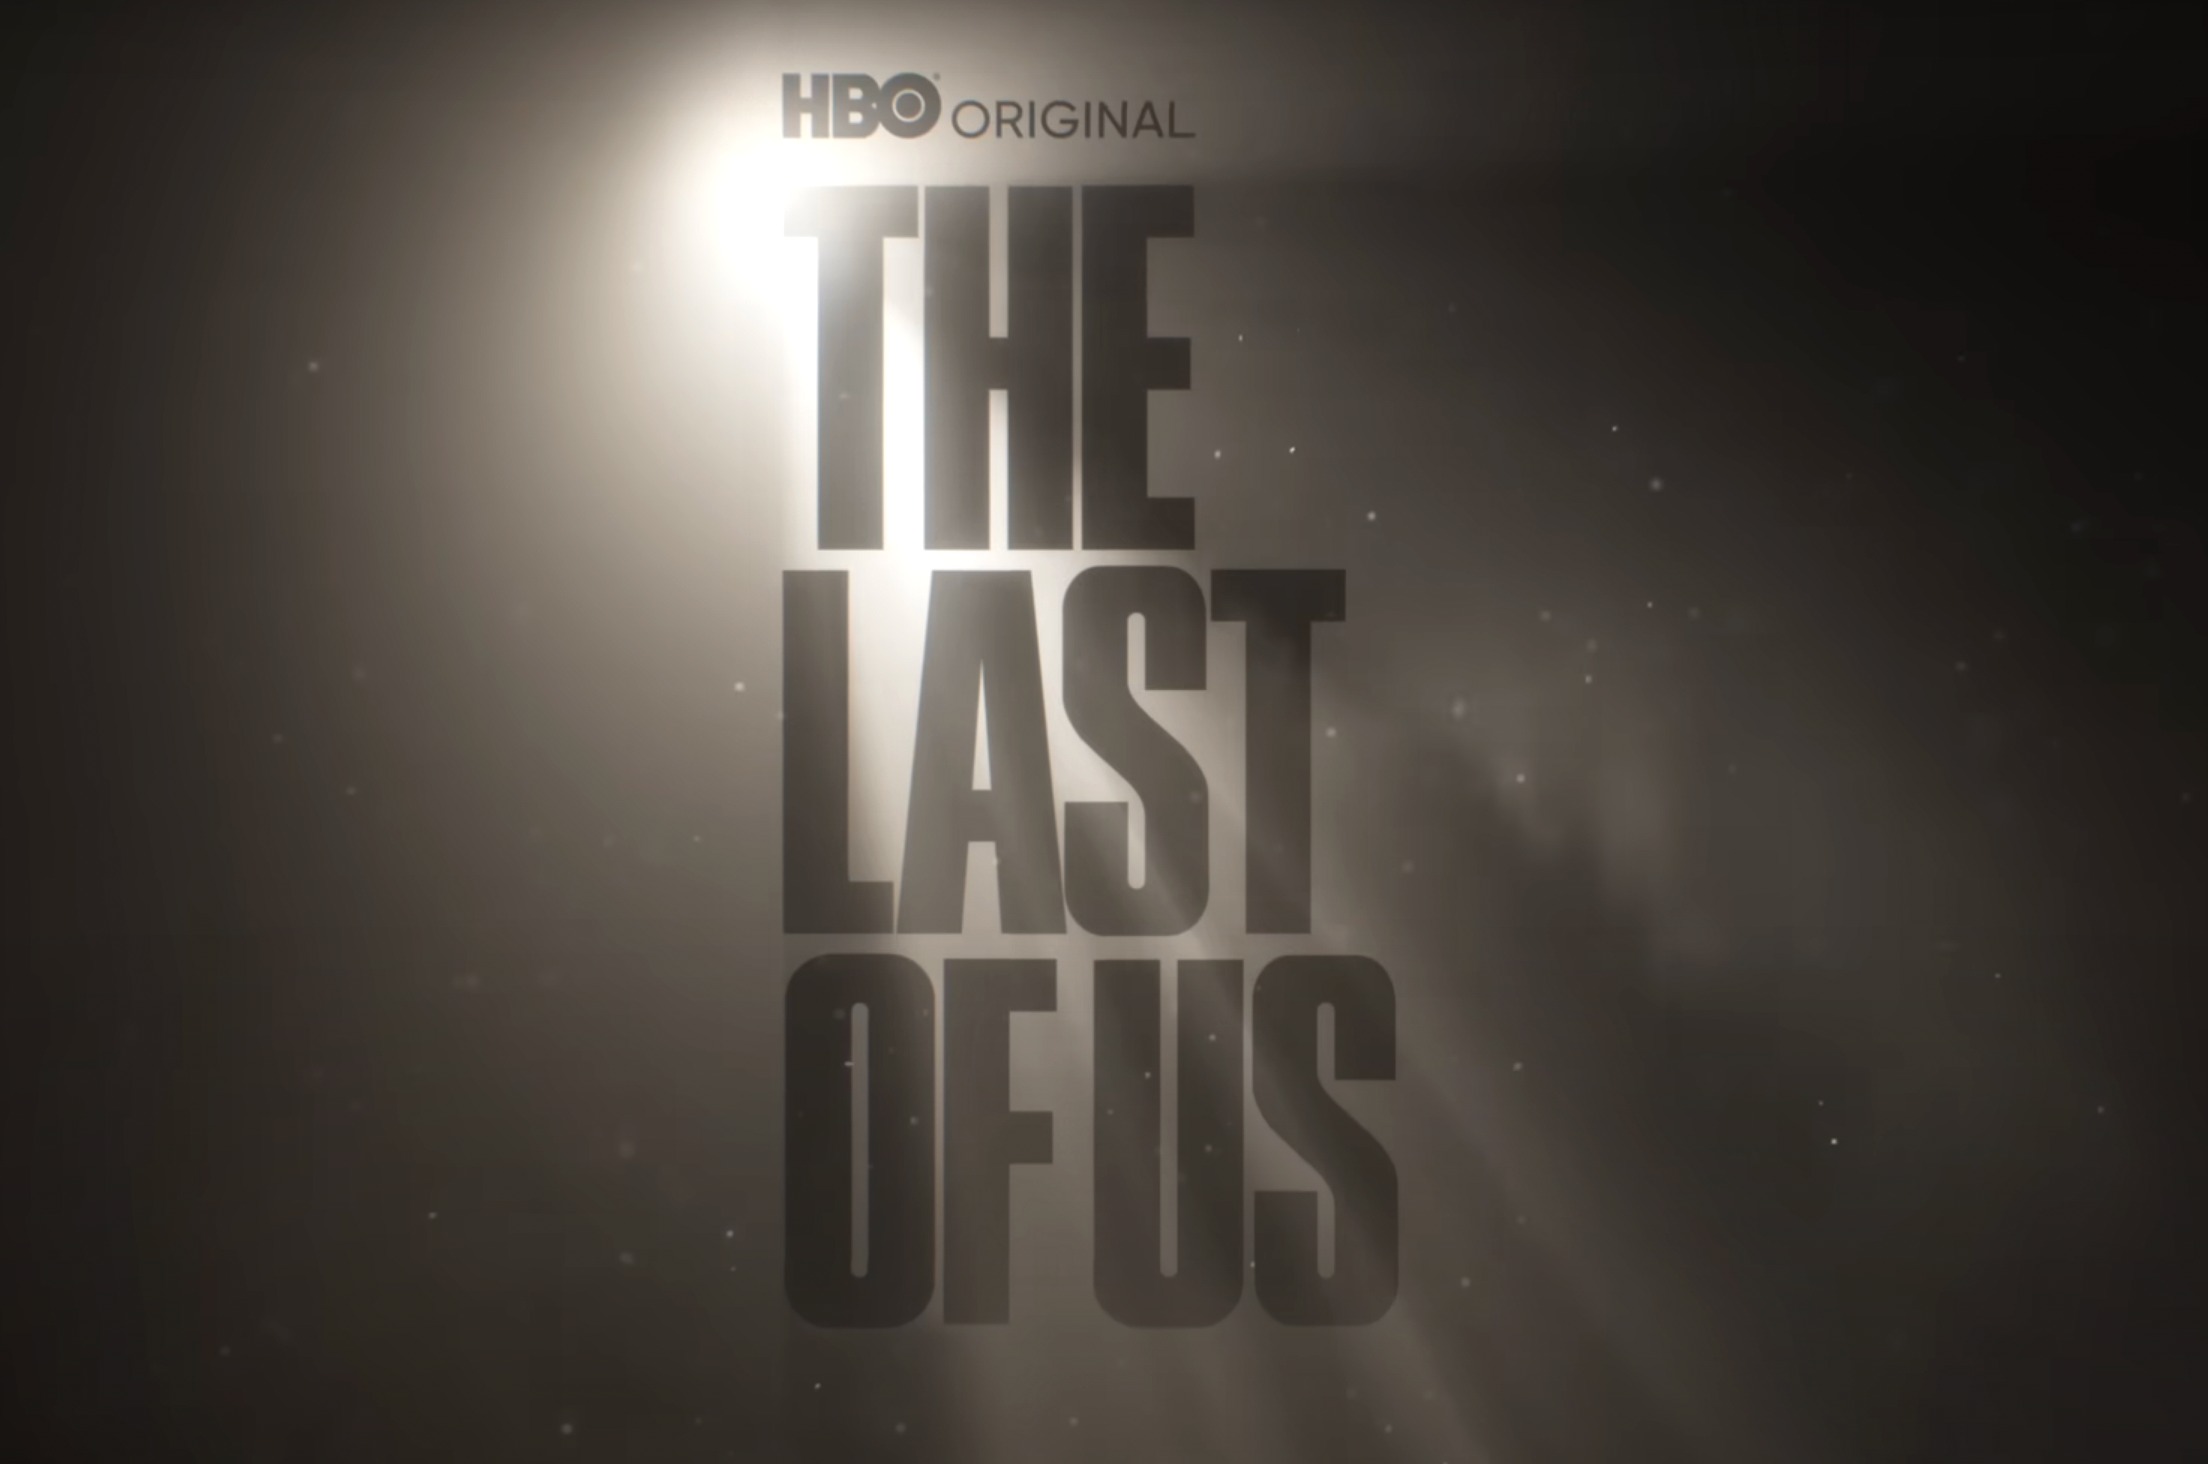 HBO releases first trailer for 'The Last of Us' series